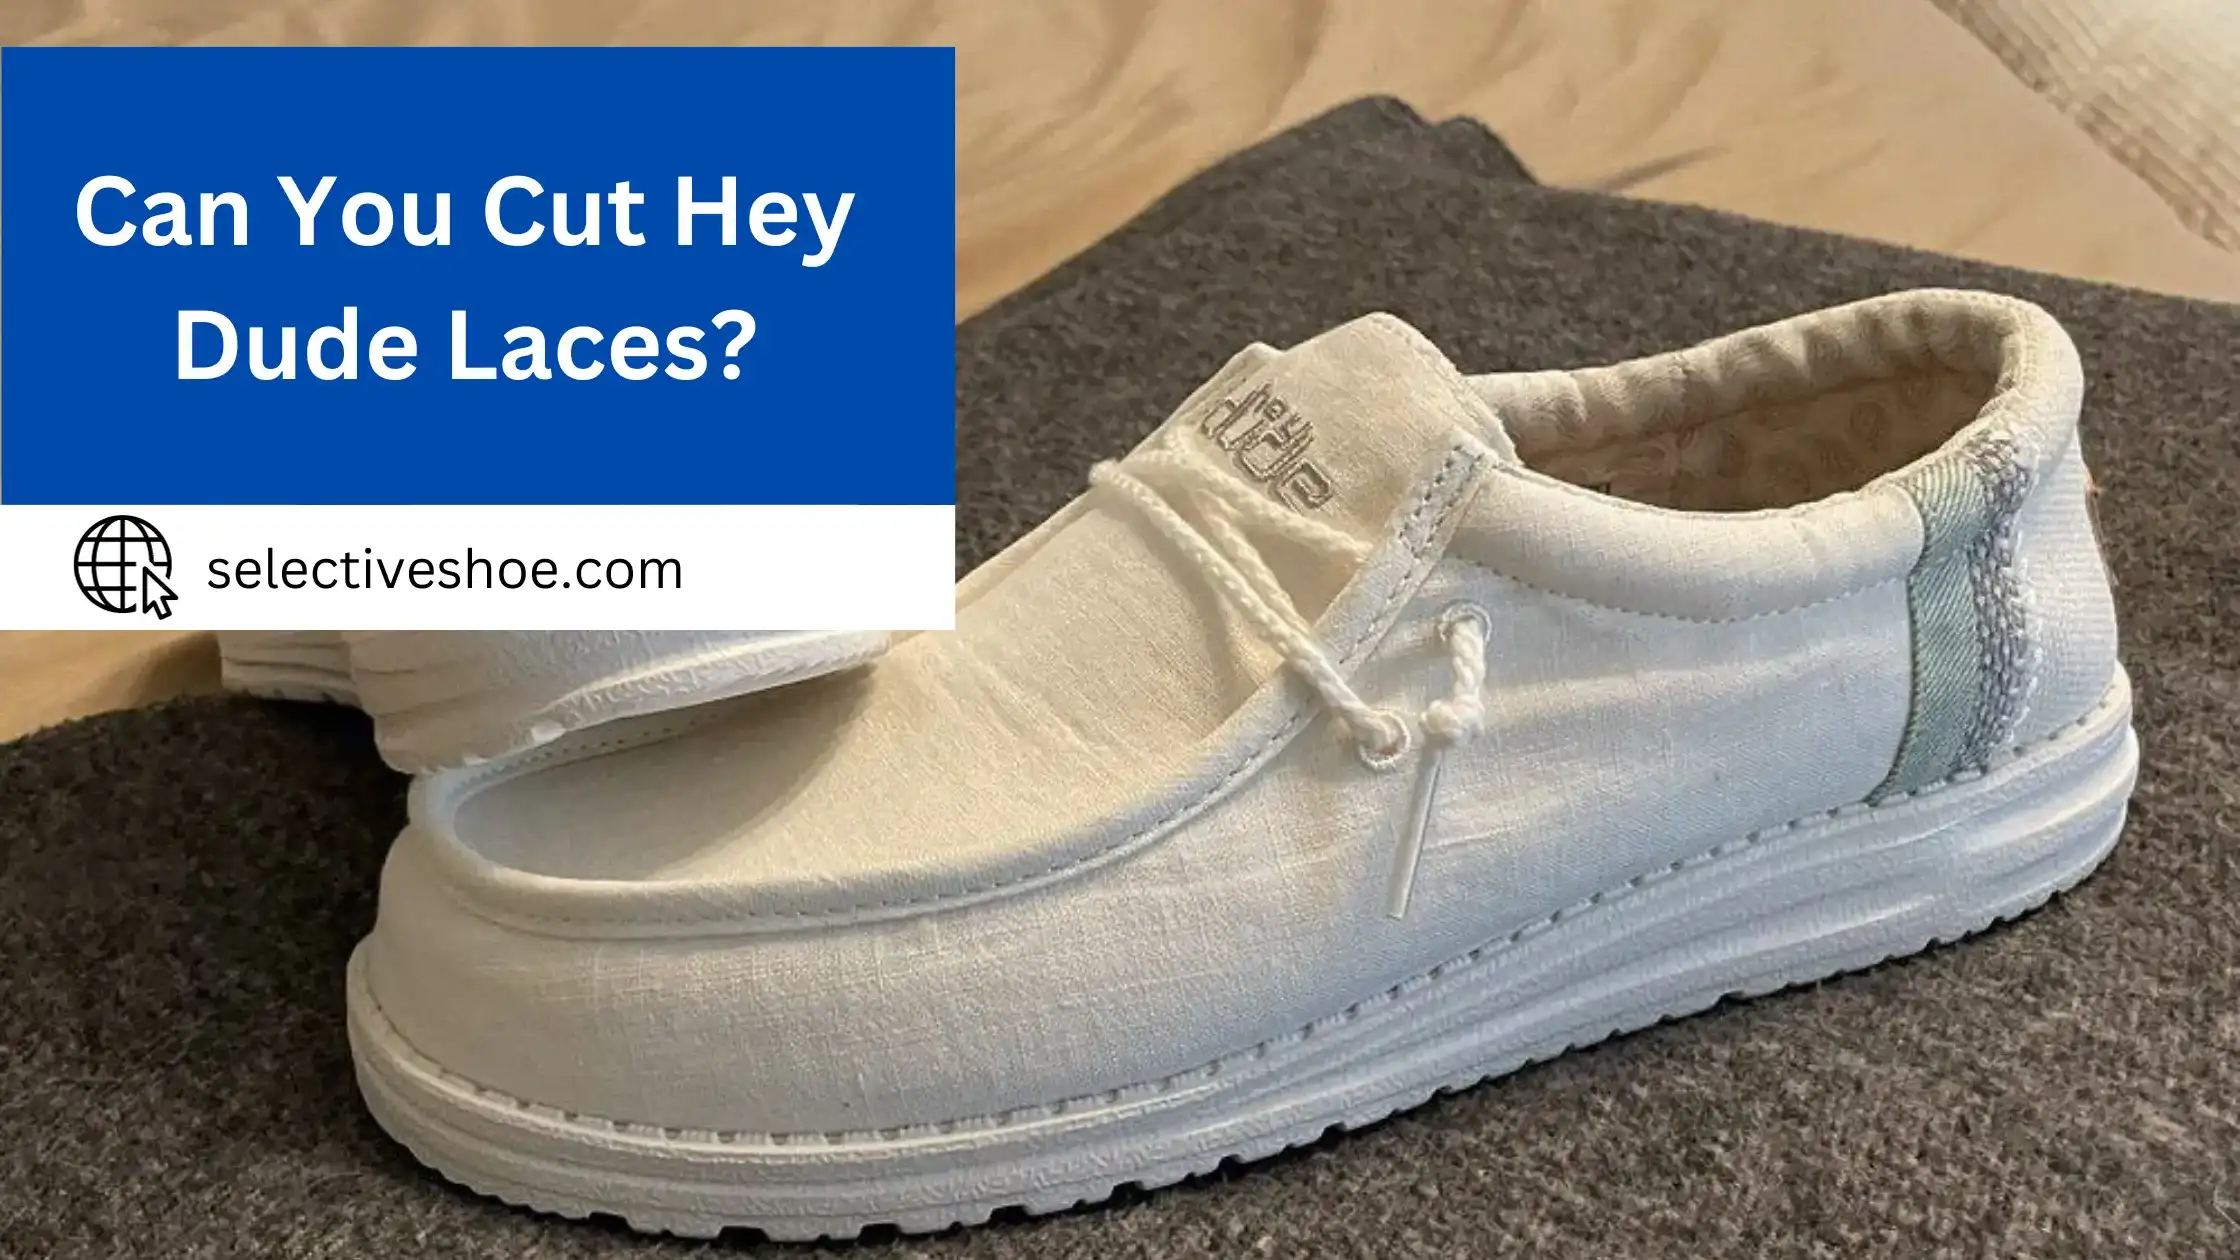 Can You Cut Hey Dude Laces? Step-by-Step Guide